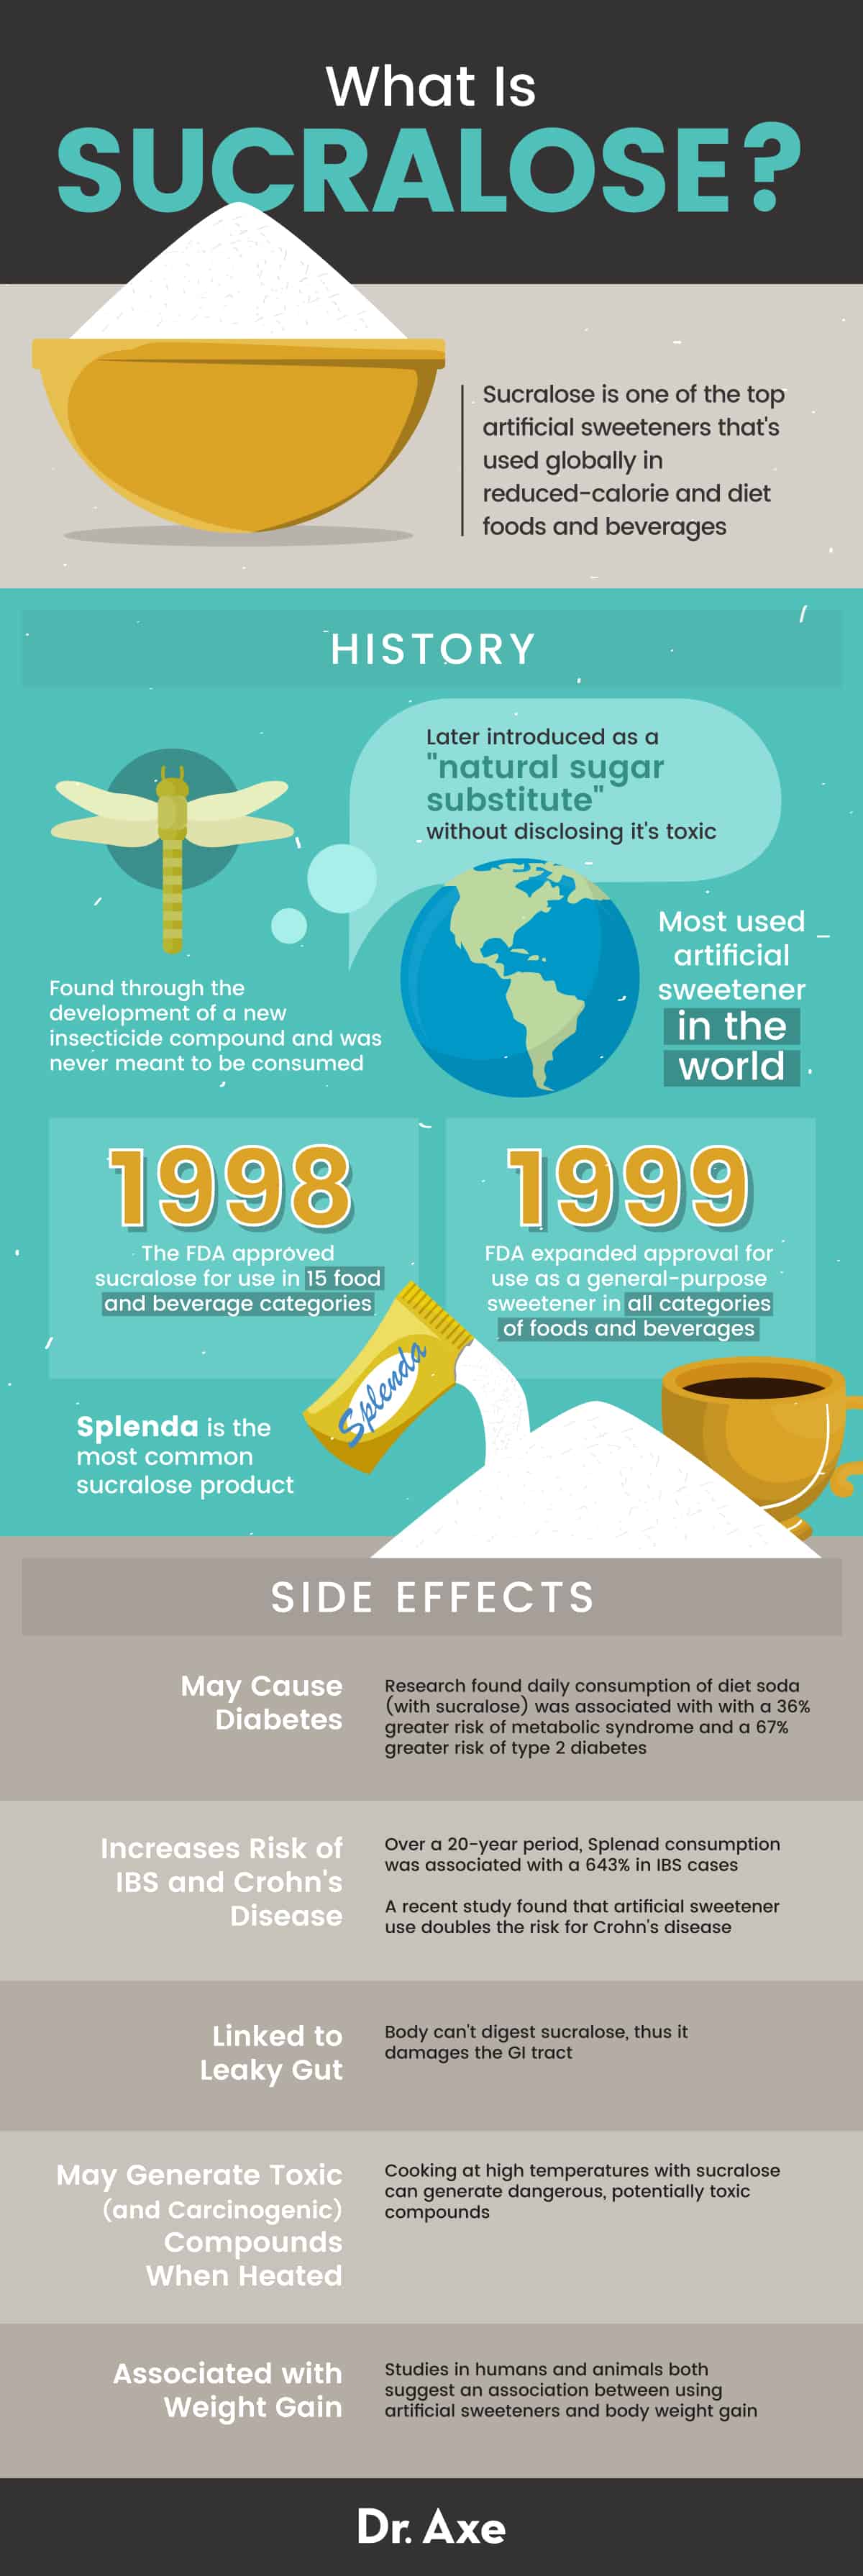 The Sucralose Infographic Courtesy of Dr-Axe